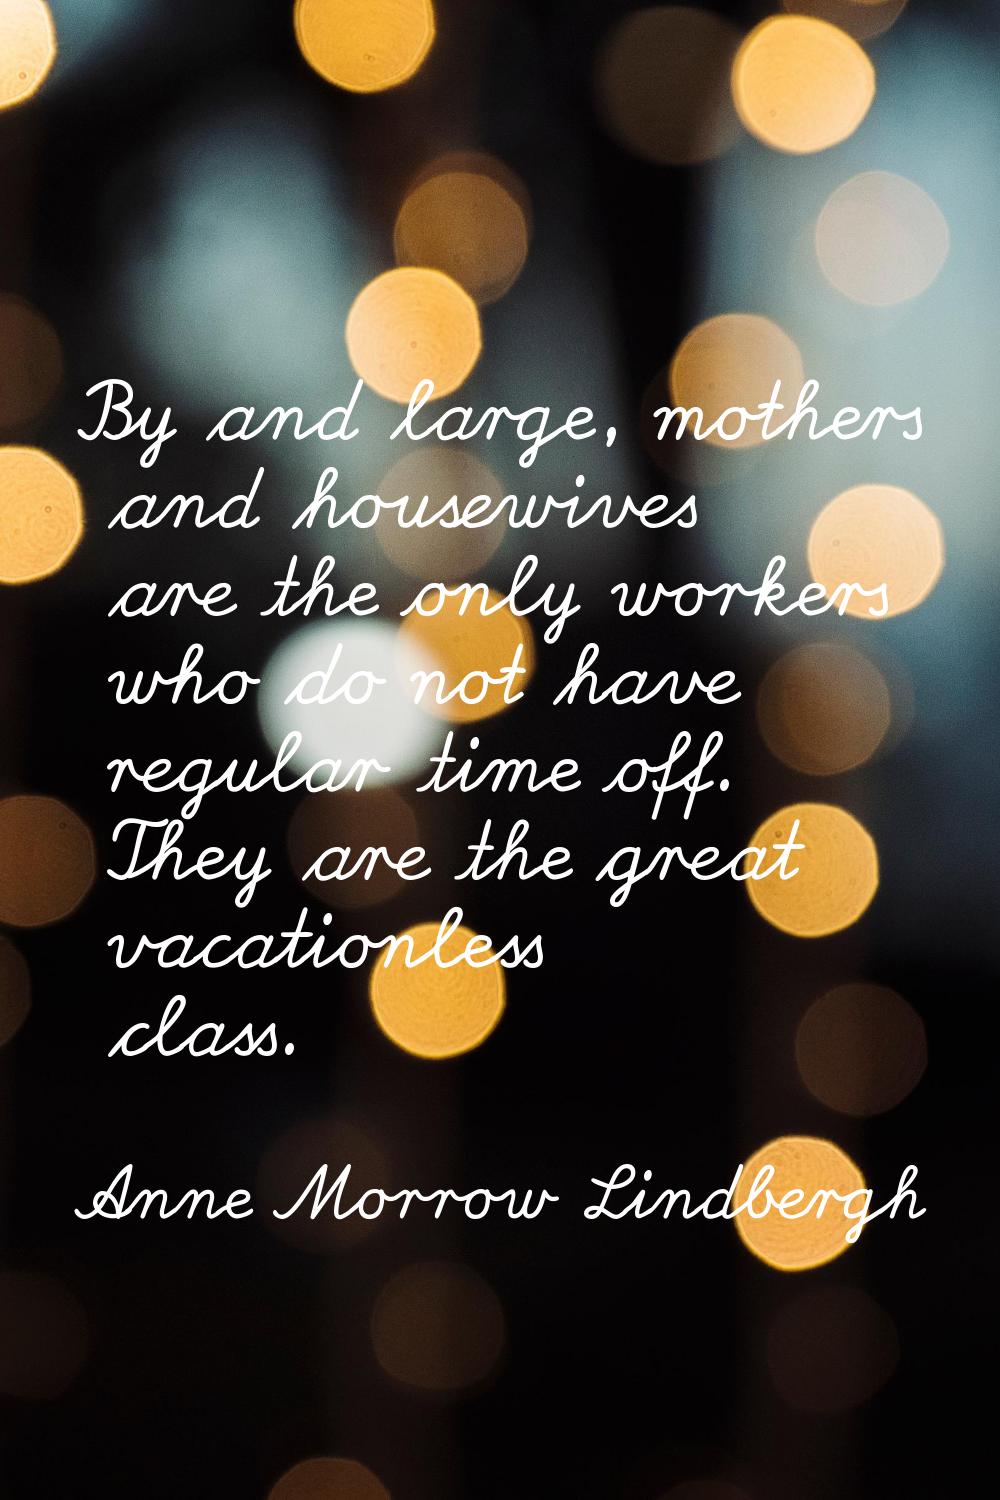 By and large, mothers and housewives are the only workers who do not have regular time off. They ar